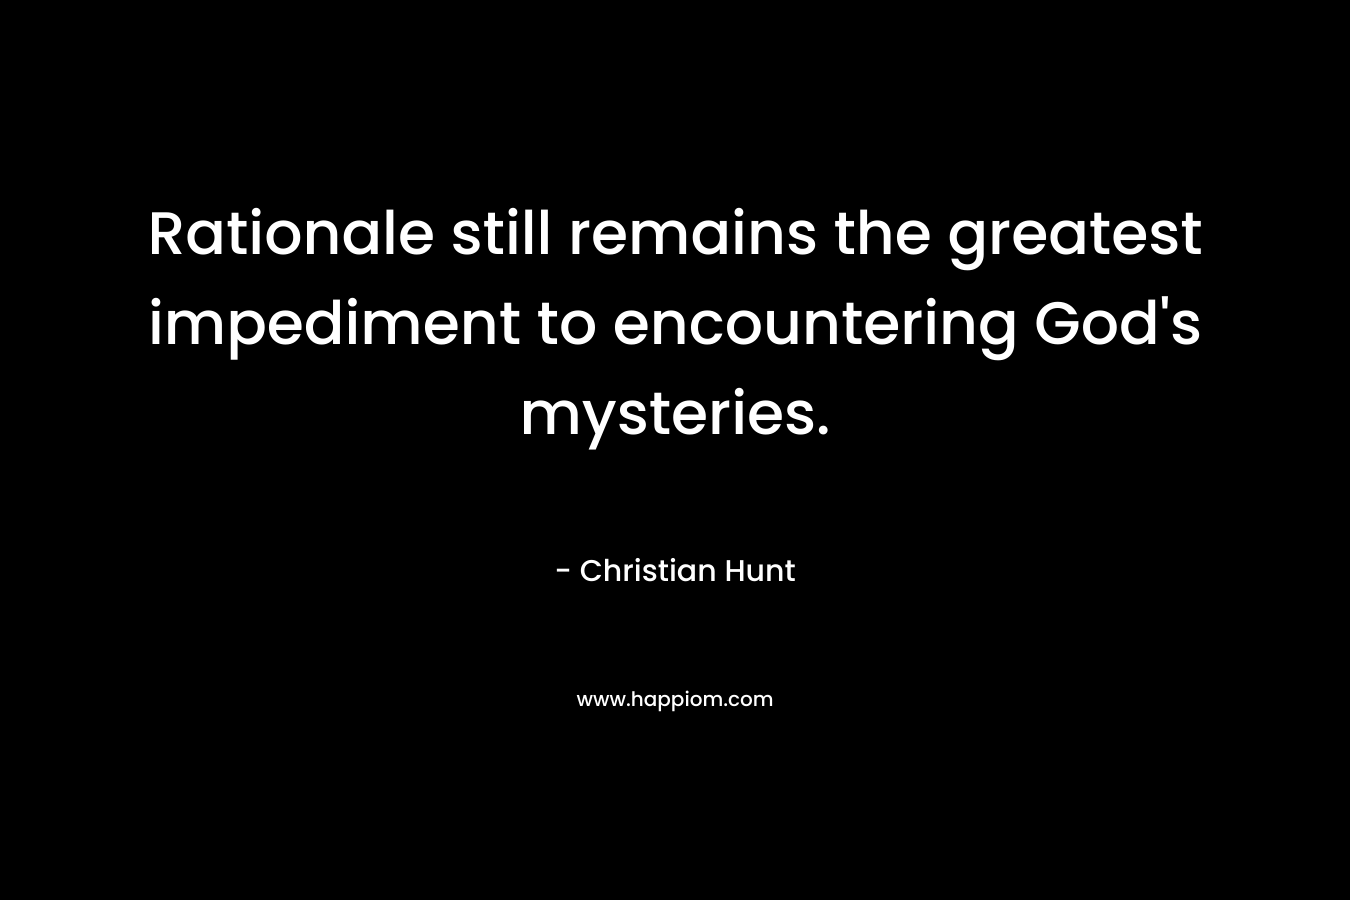 Rationale still remains the greatest impediment to encountering God's mysteries.